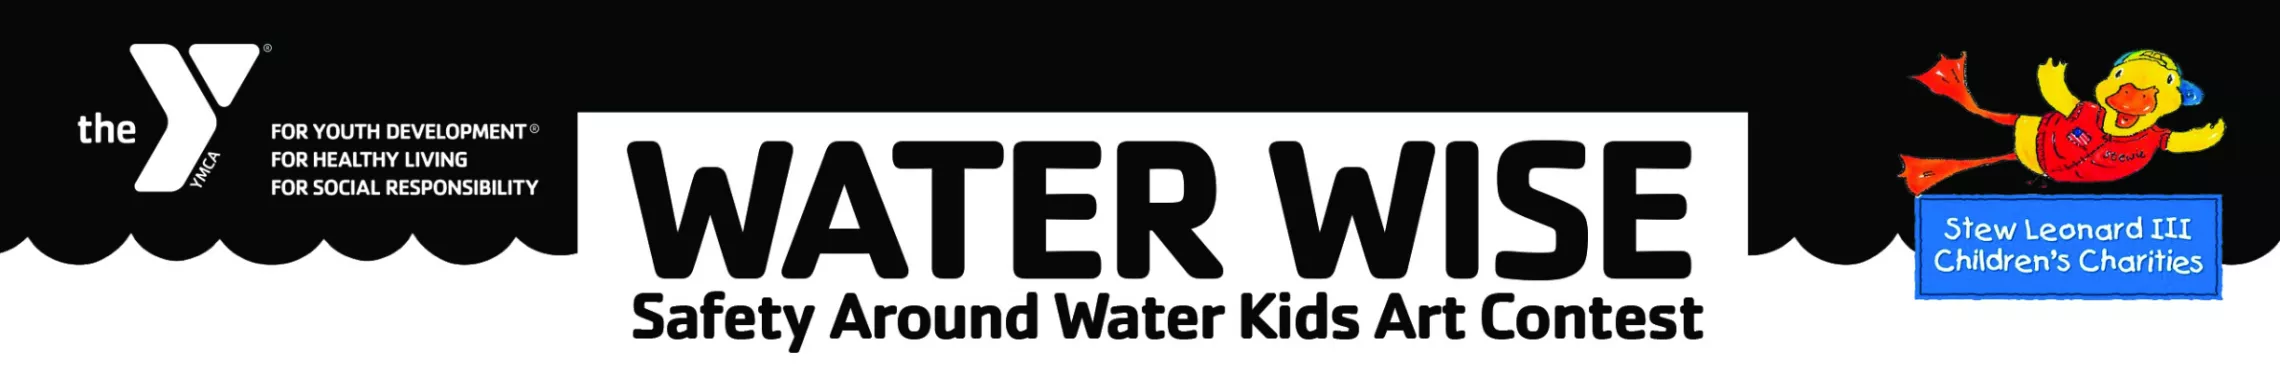 Water Wise Contest